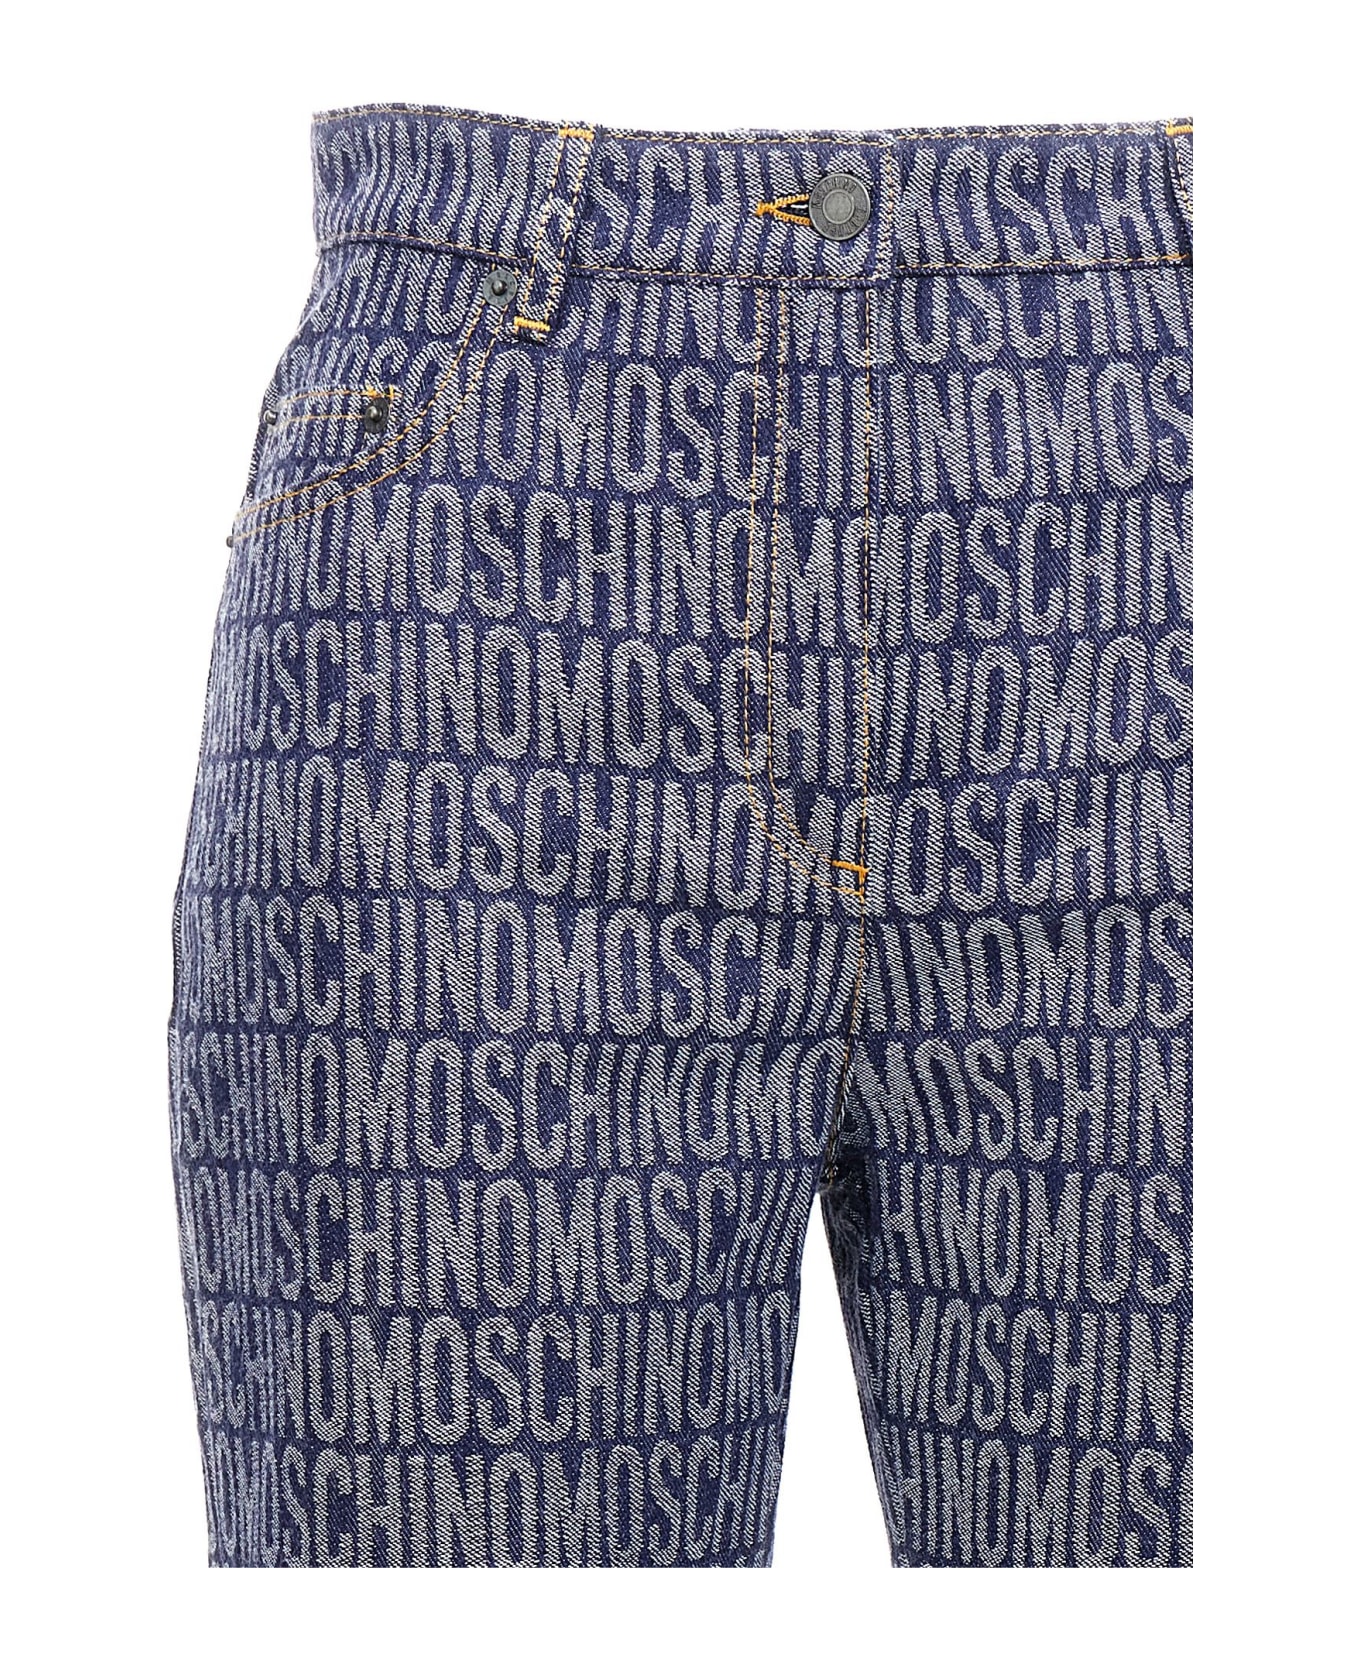 Moschino 'logo' Jeans - Blue ボトムス